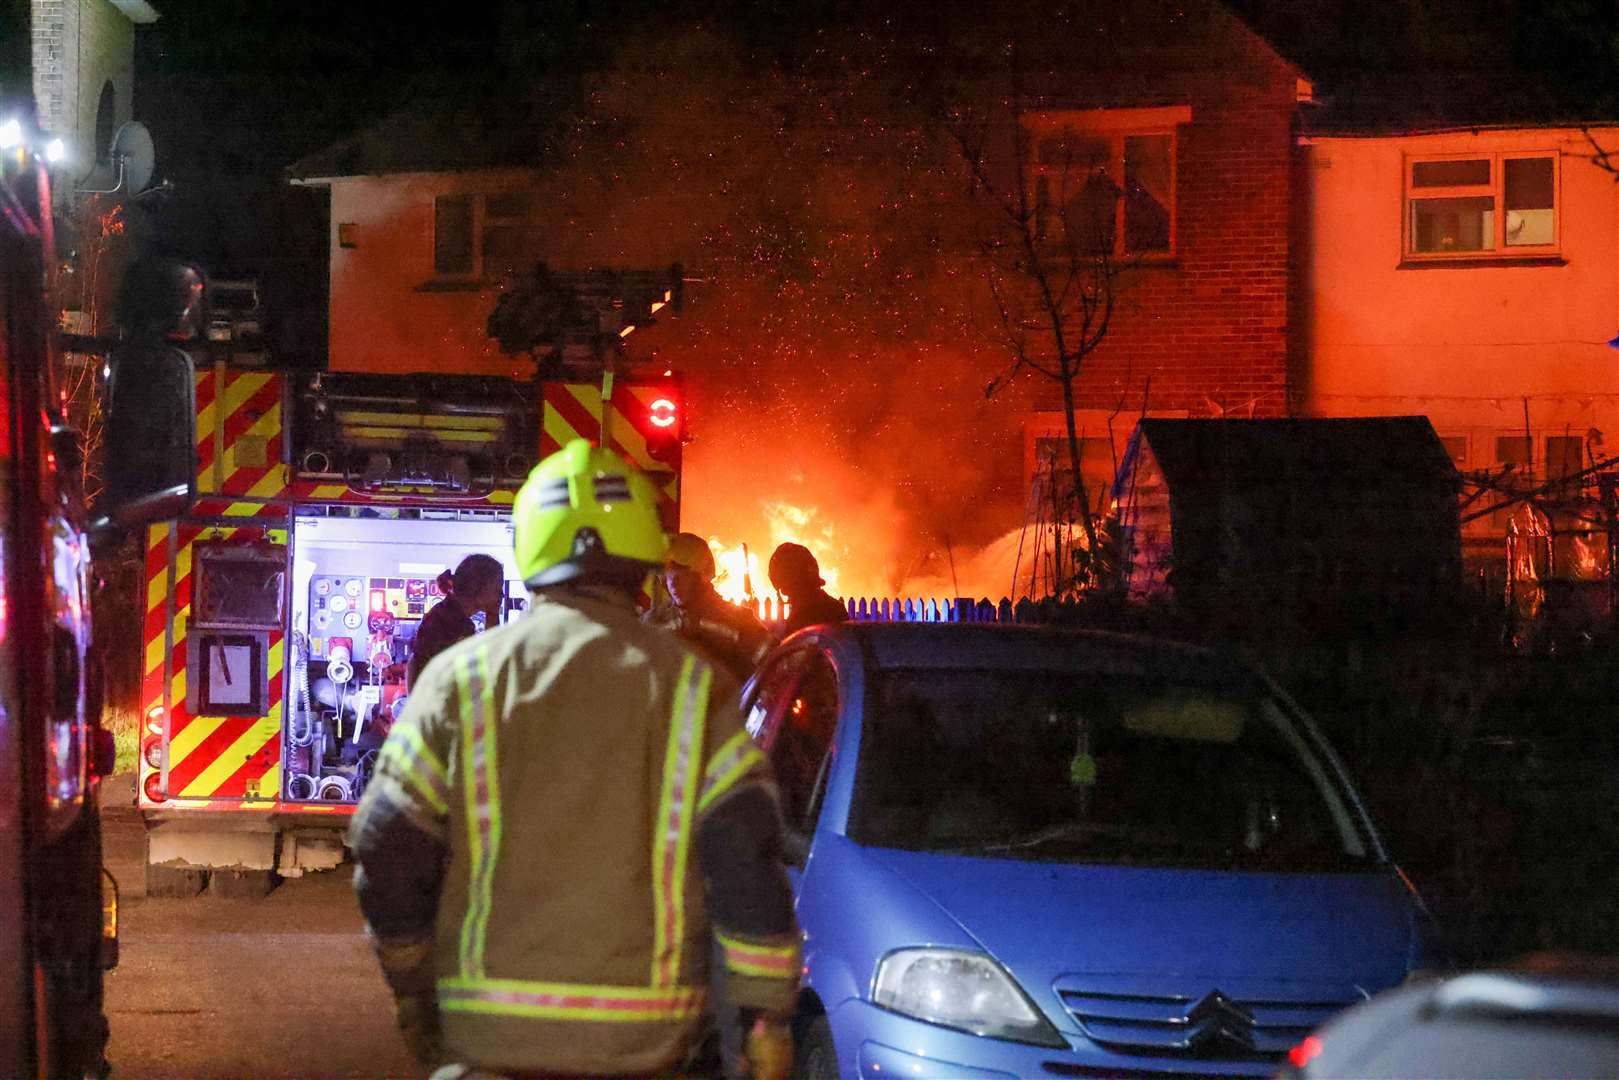 Emergency services were at the scene. Picture: UKNIP